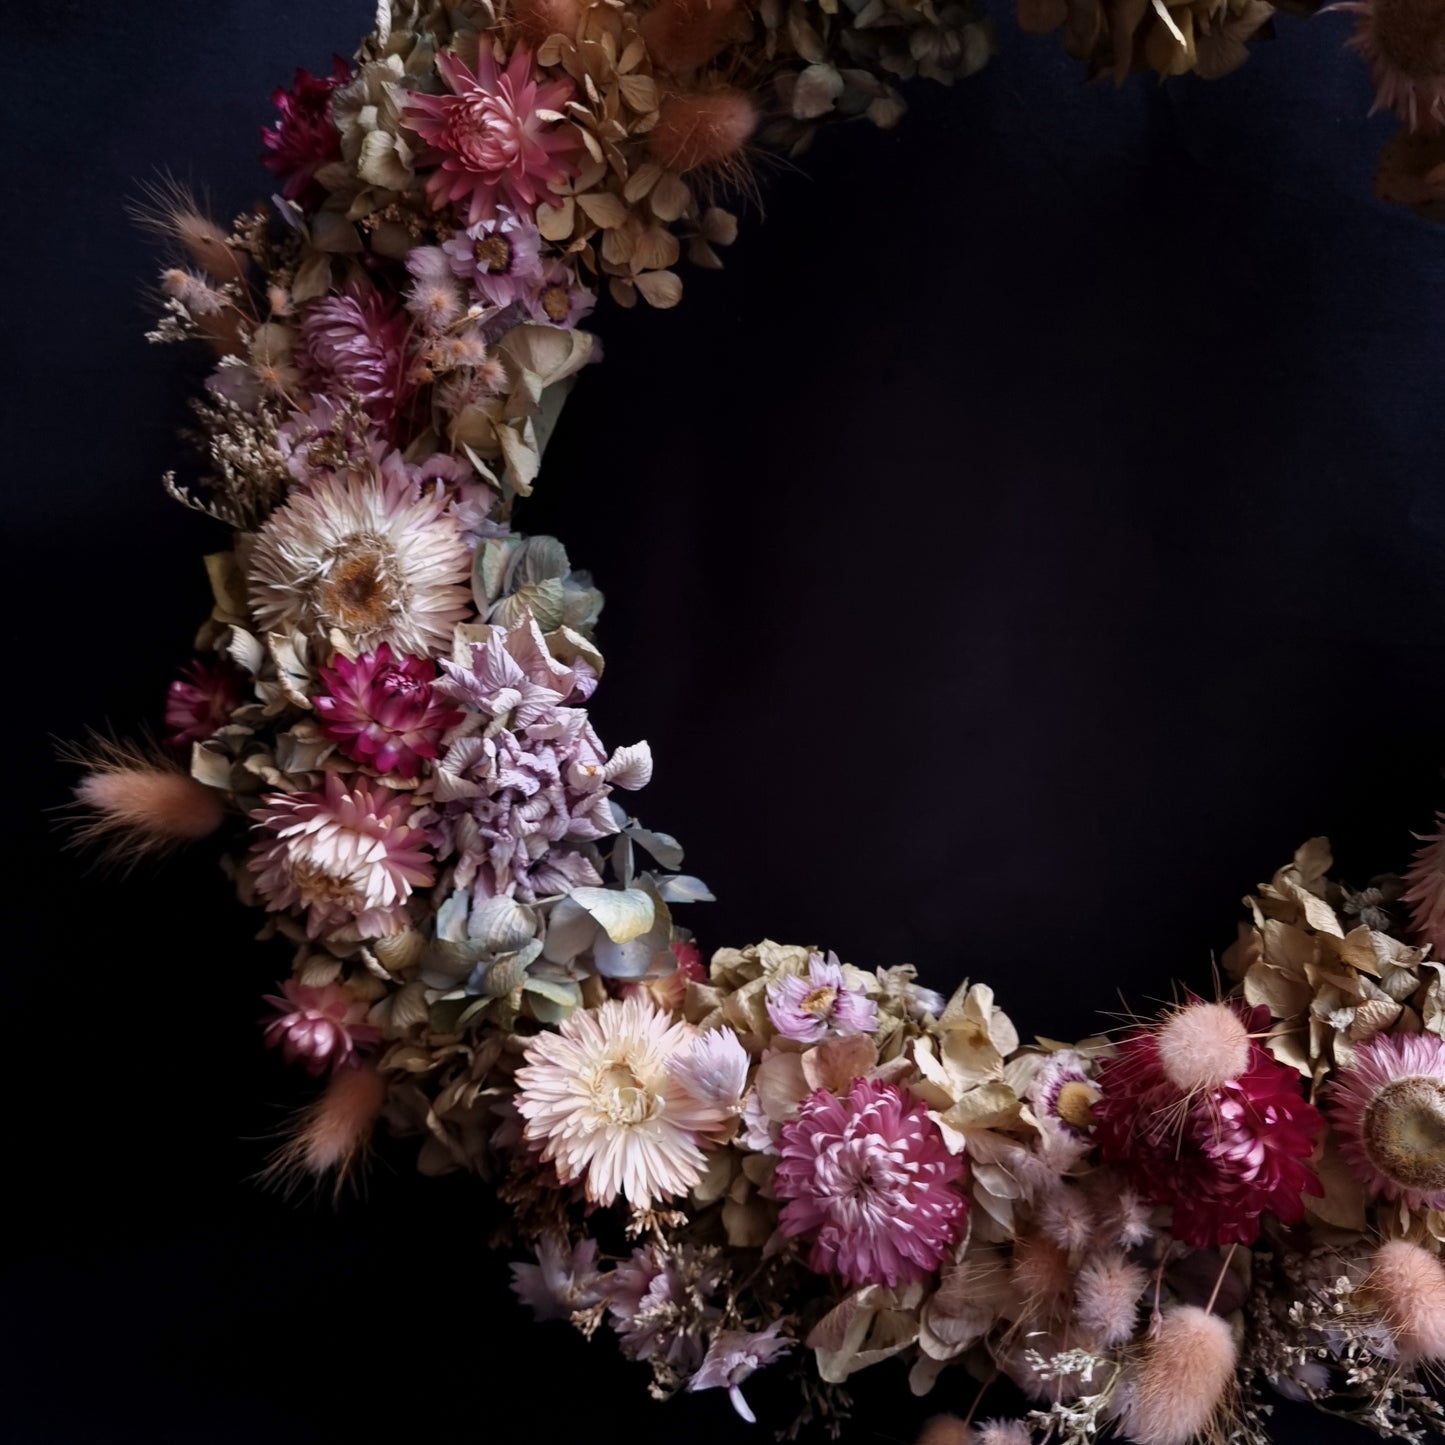 Pink Dried Floral Wreath - Large